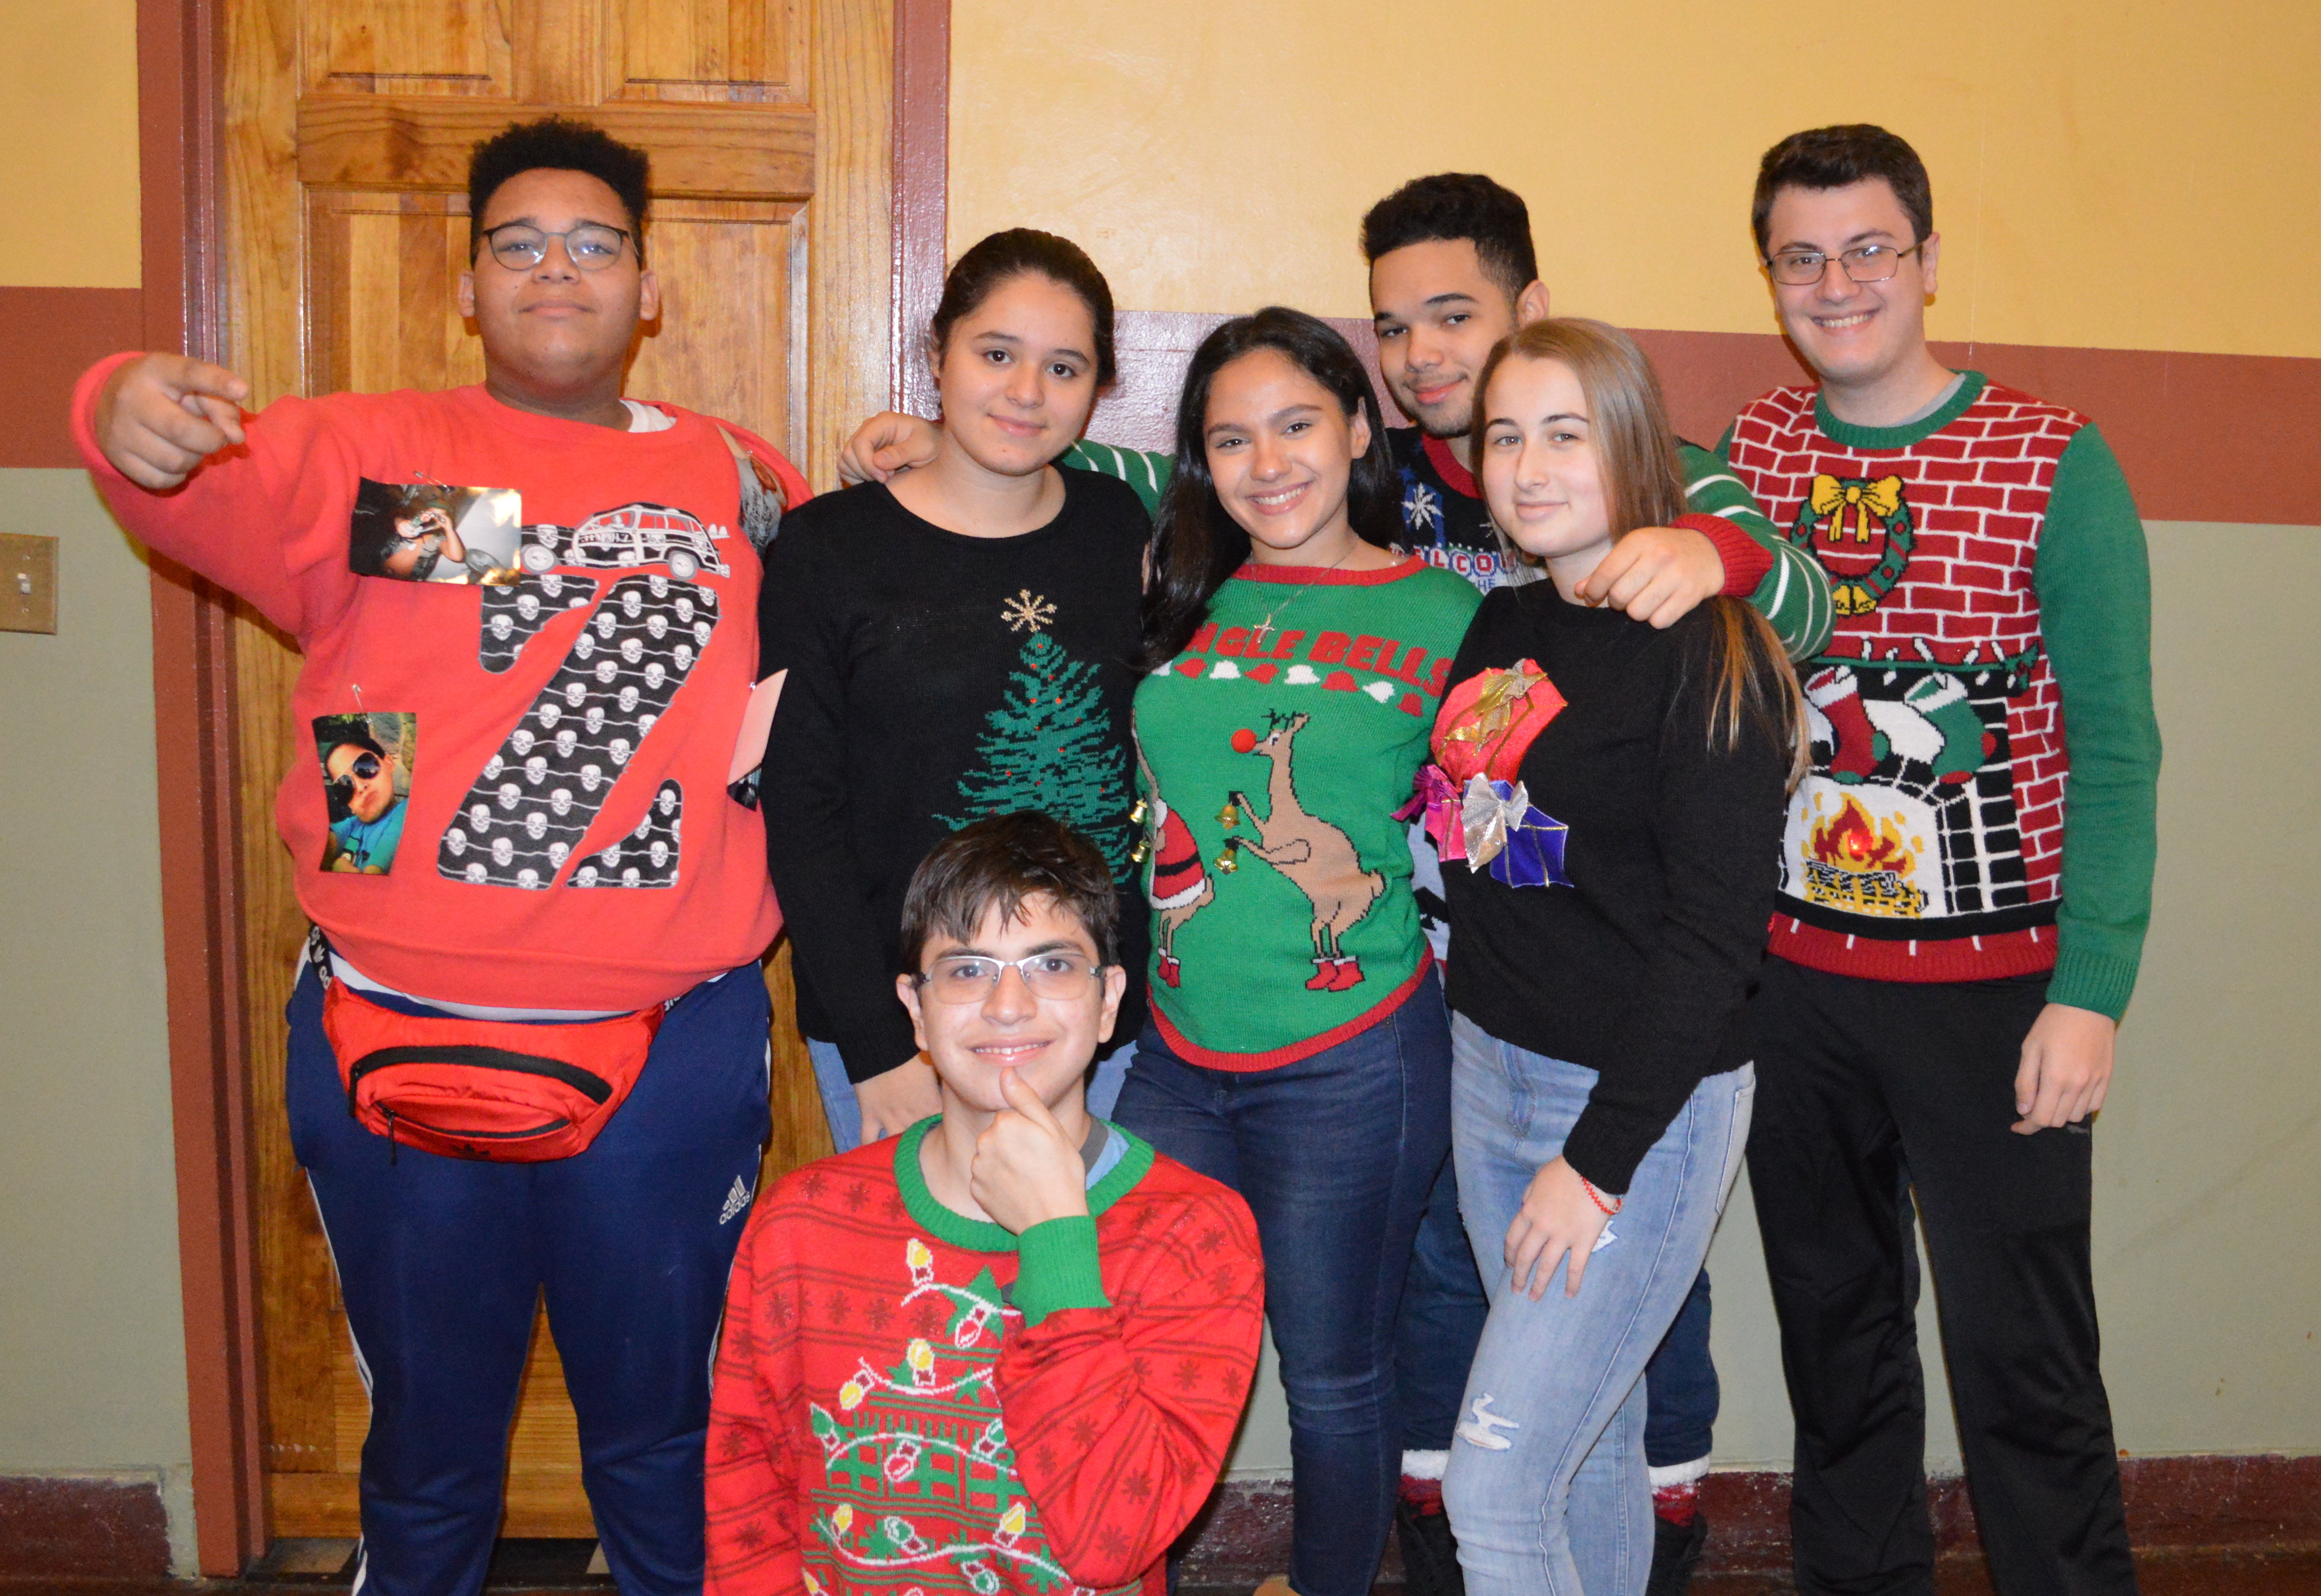 Adelphians wore their best and ugliest sweaters for the Ugly Holiday Sweater Contest!